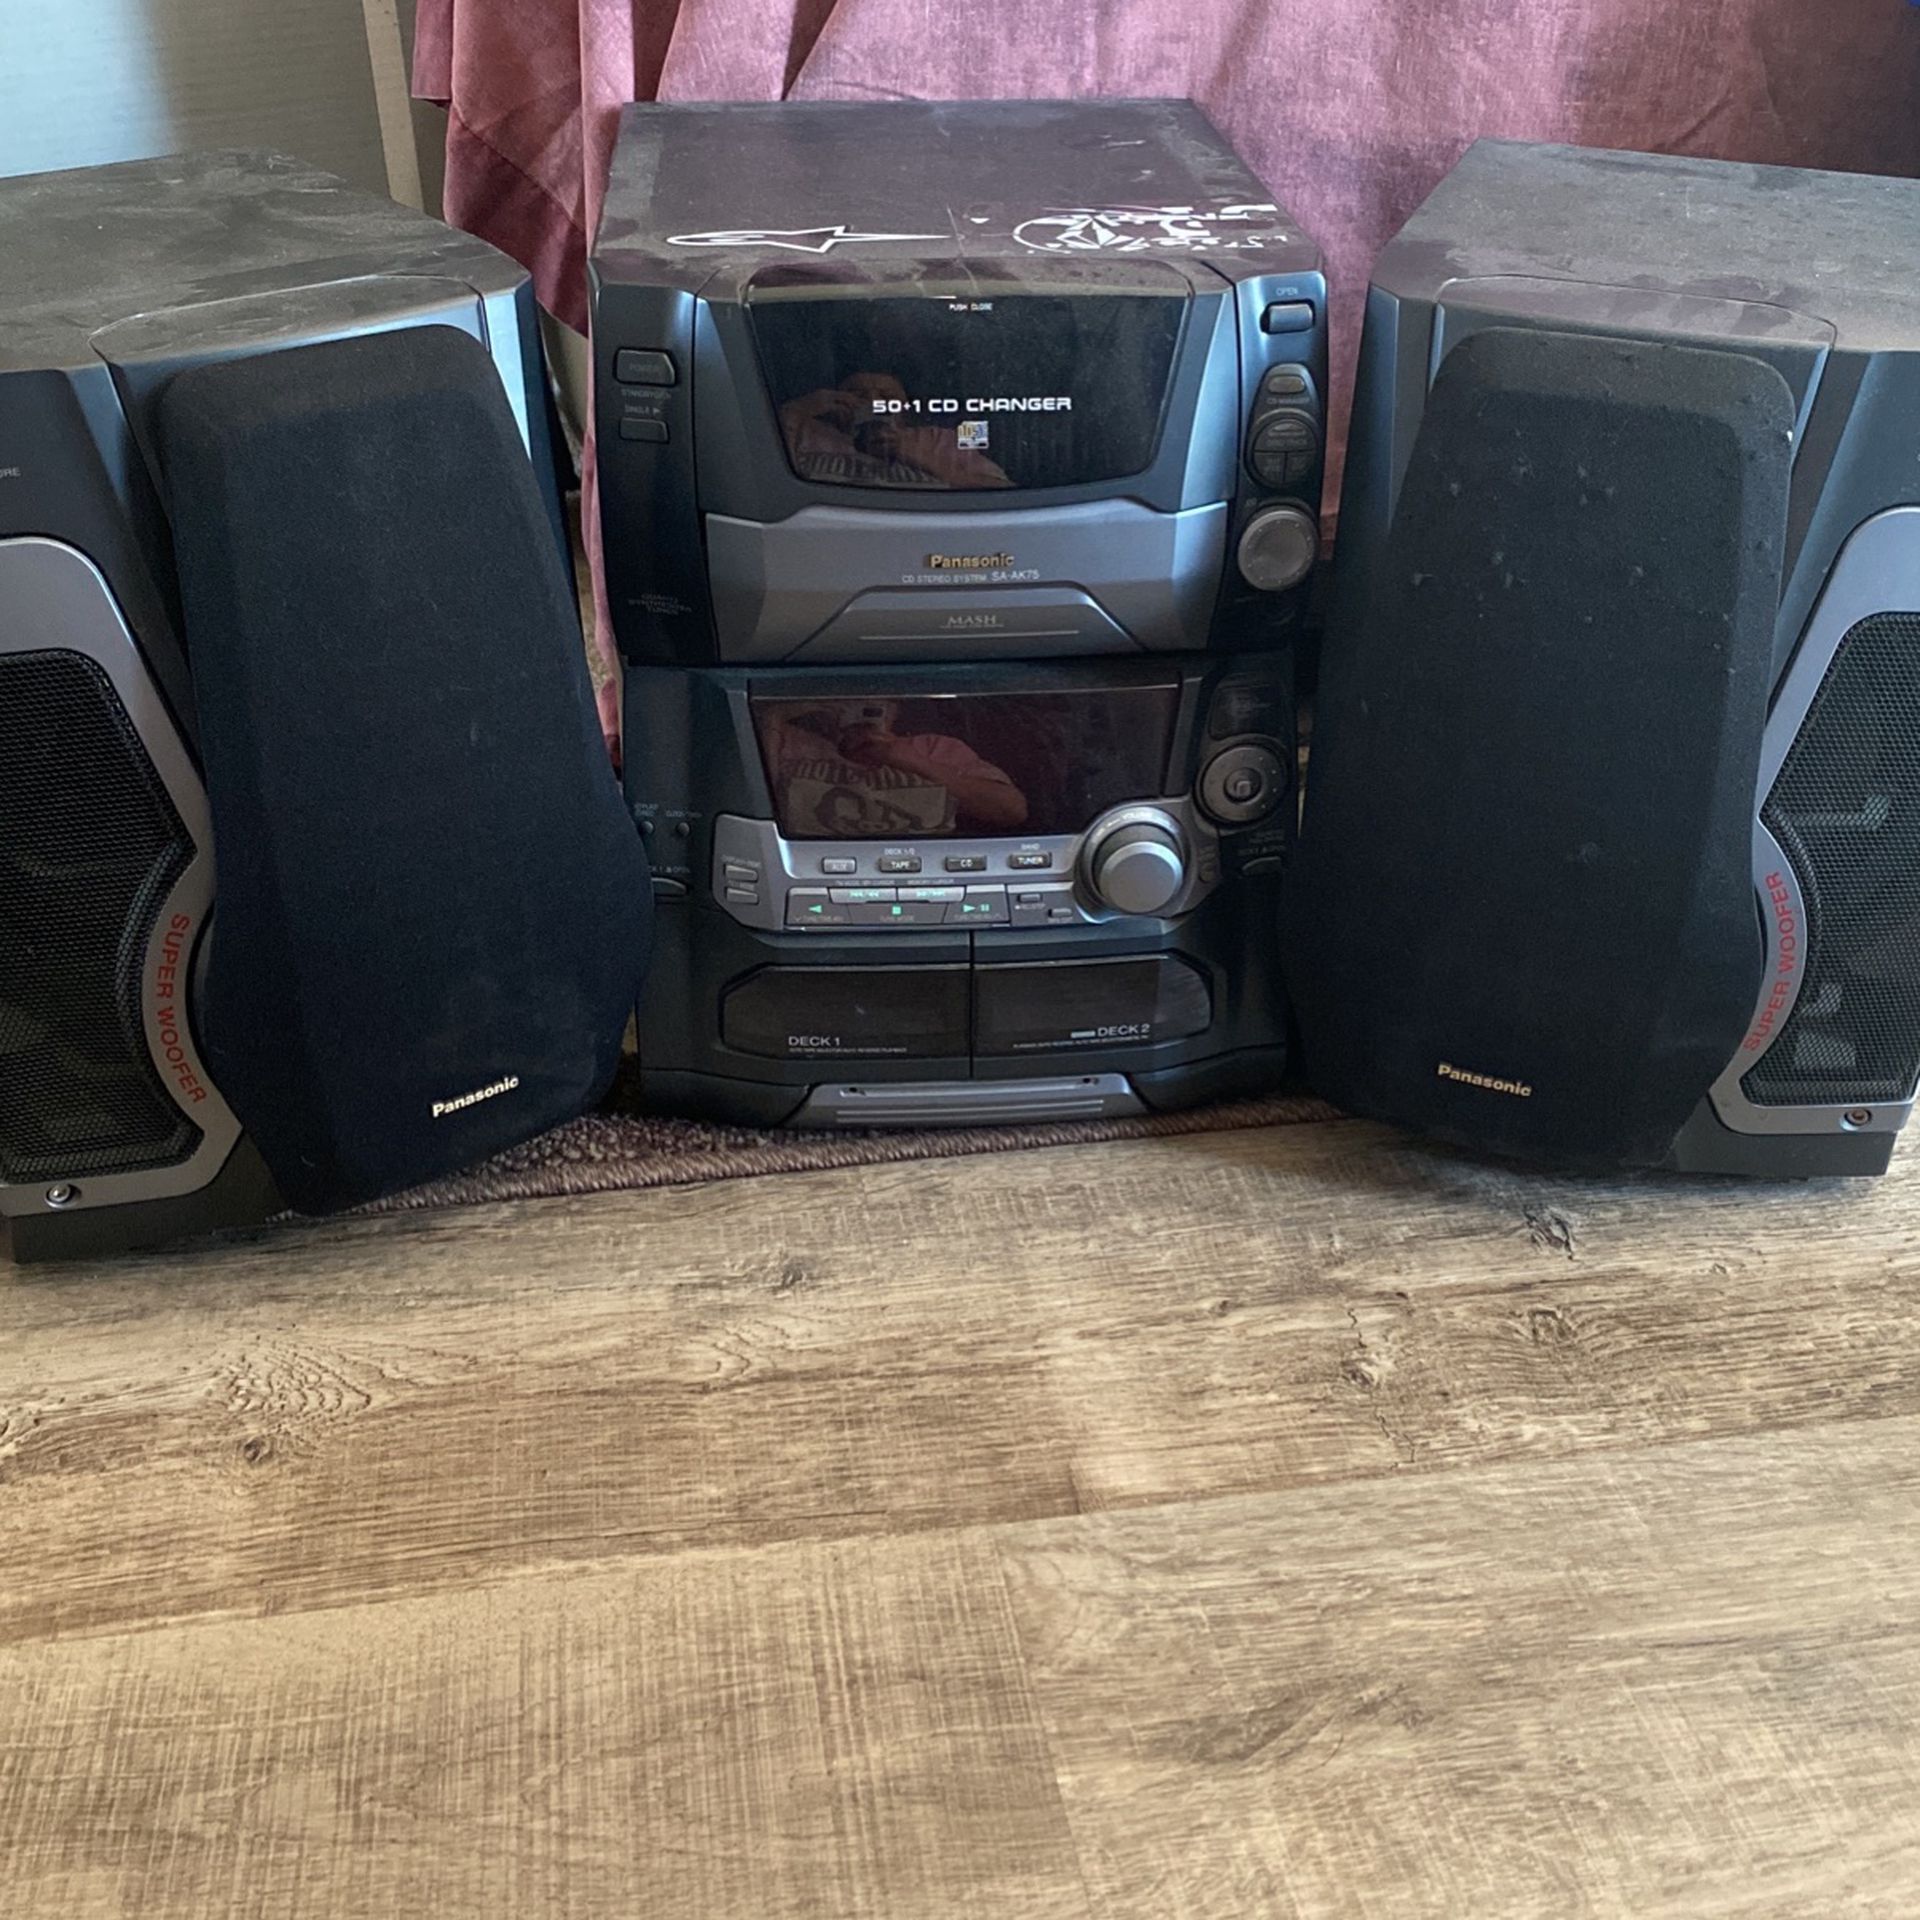 Panasonic Stereo & Speaker System With Super Woofer